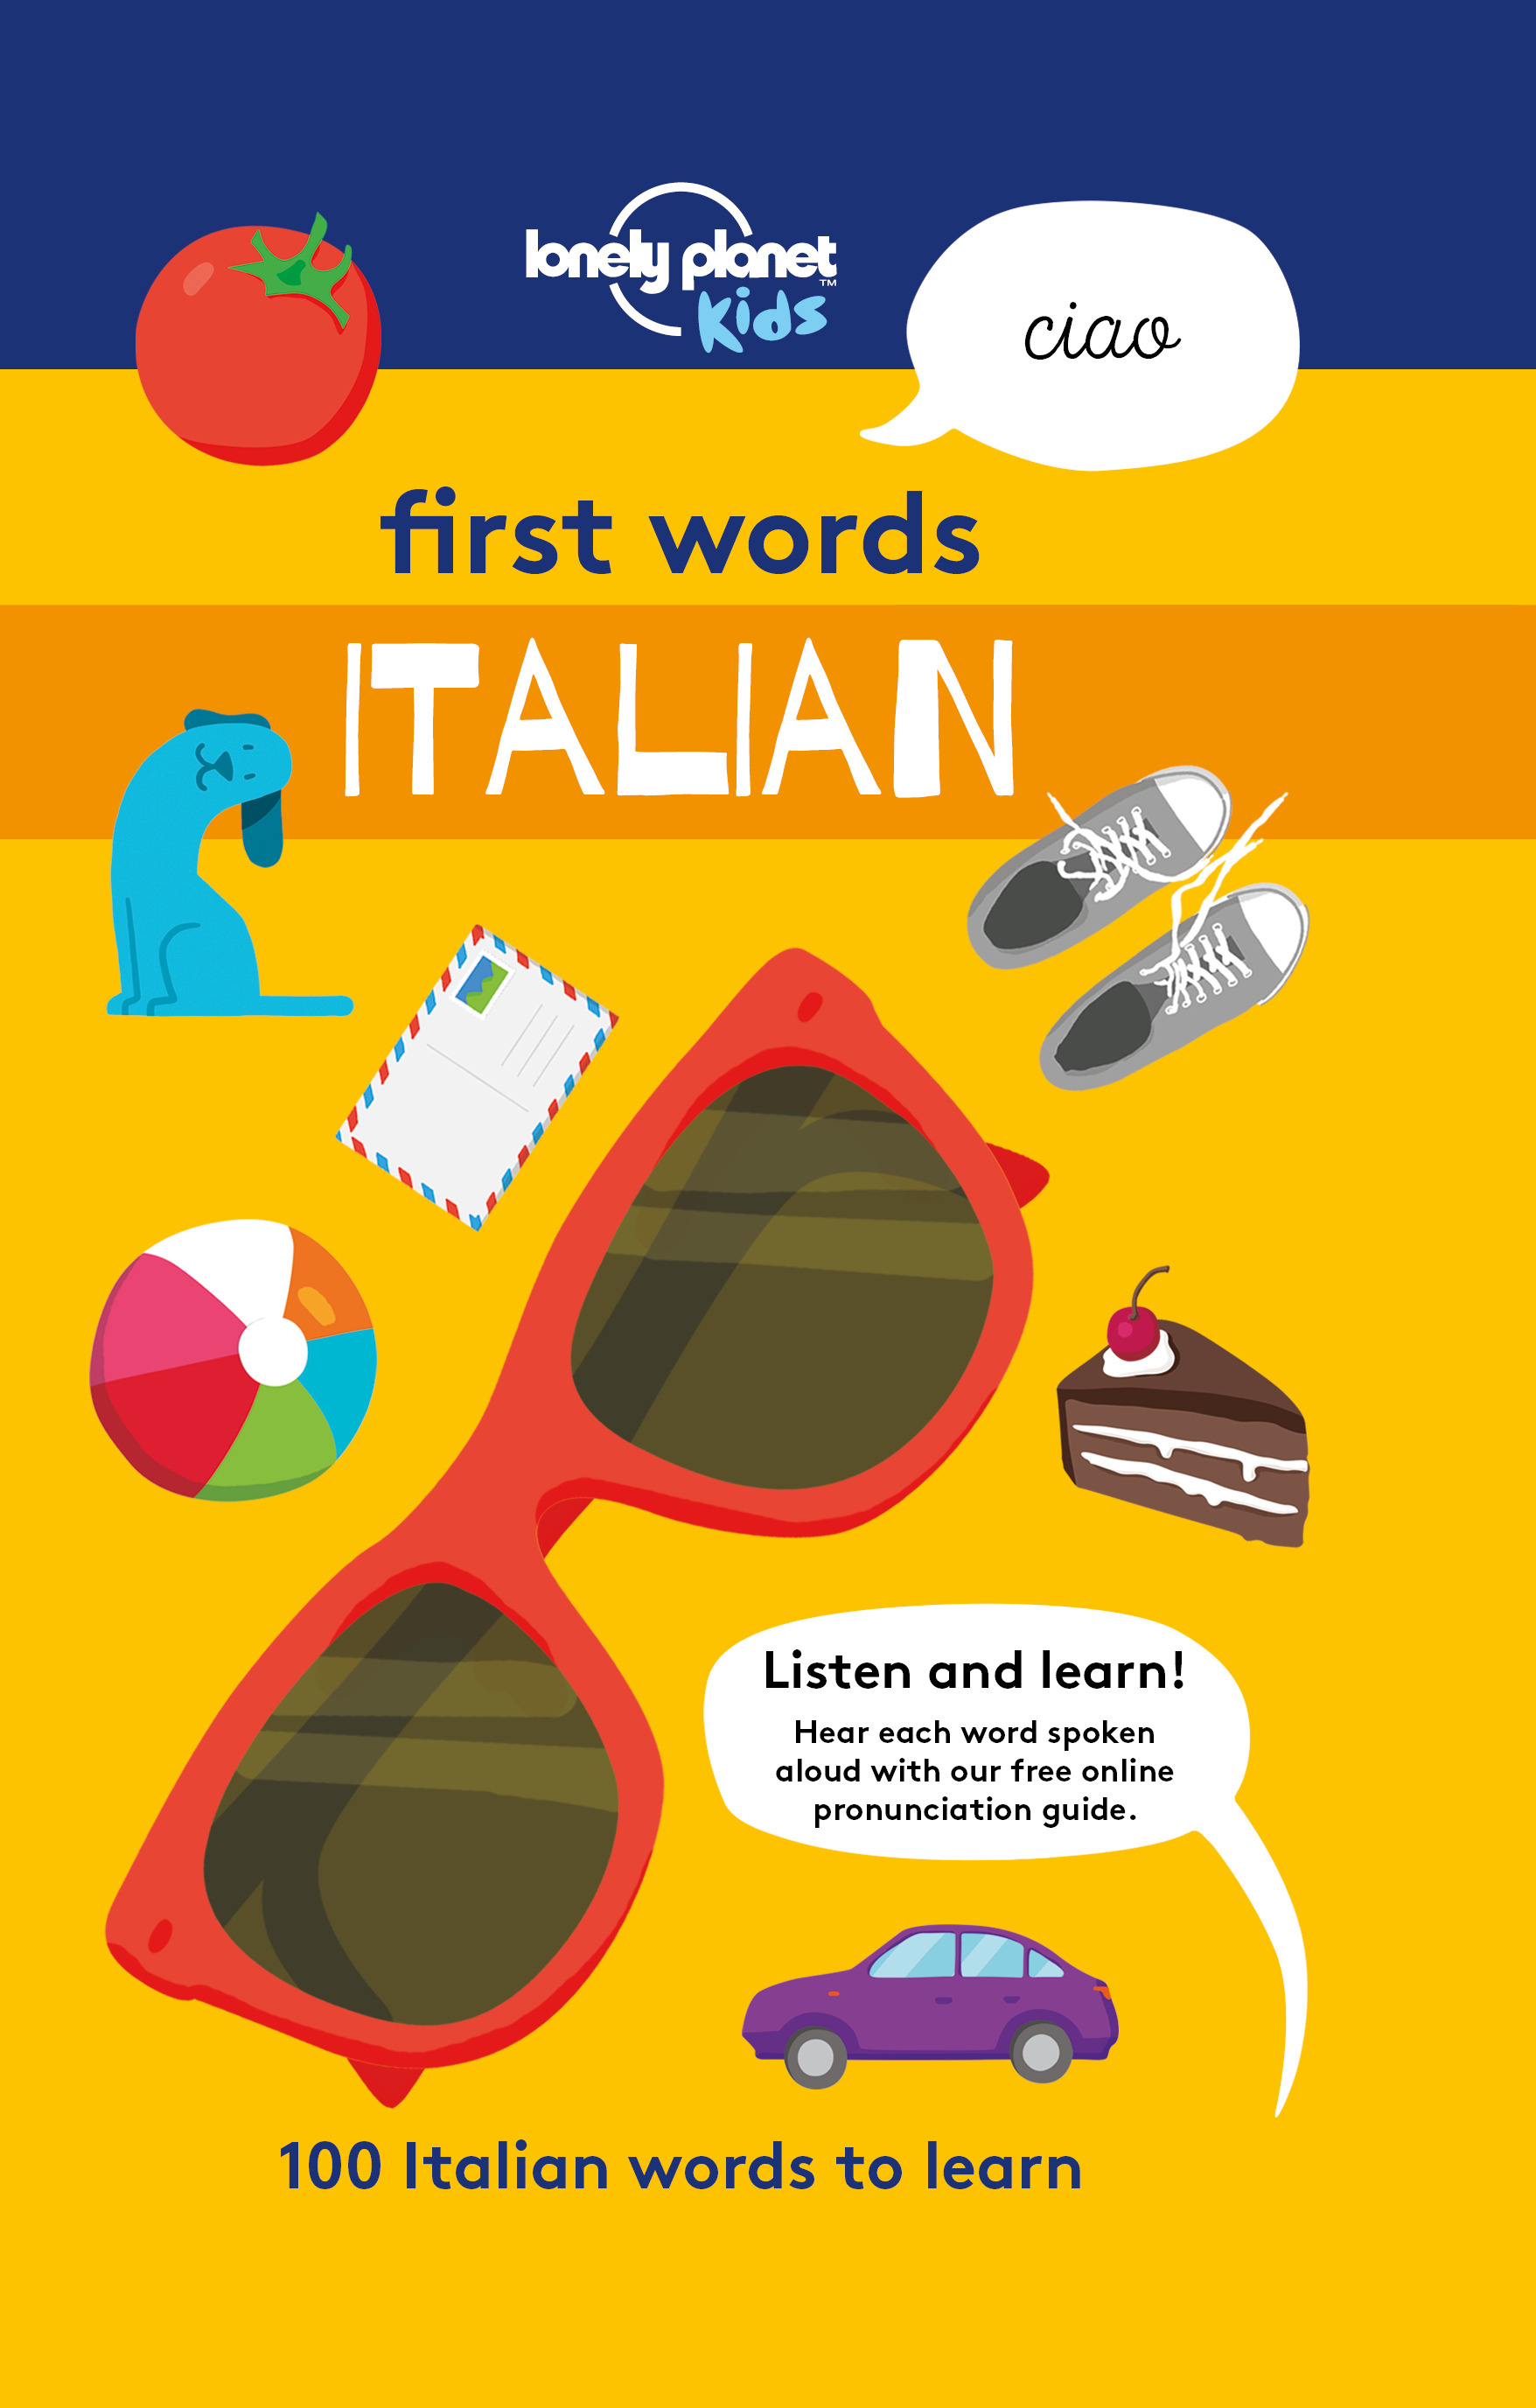 Kids, Lonely Planet - First Words - Italian: 100 Italian words to learn, ebook